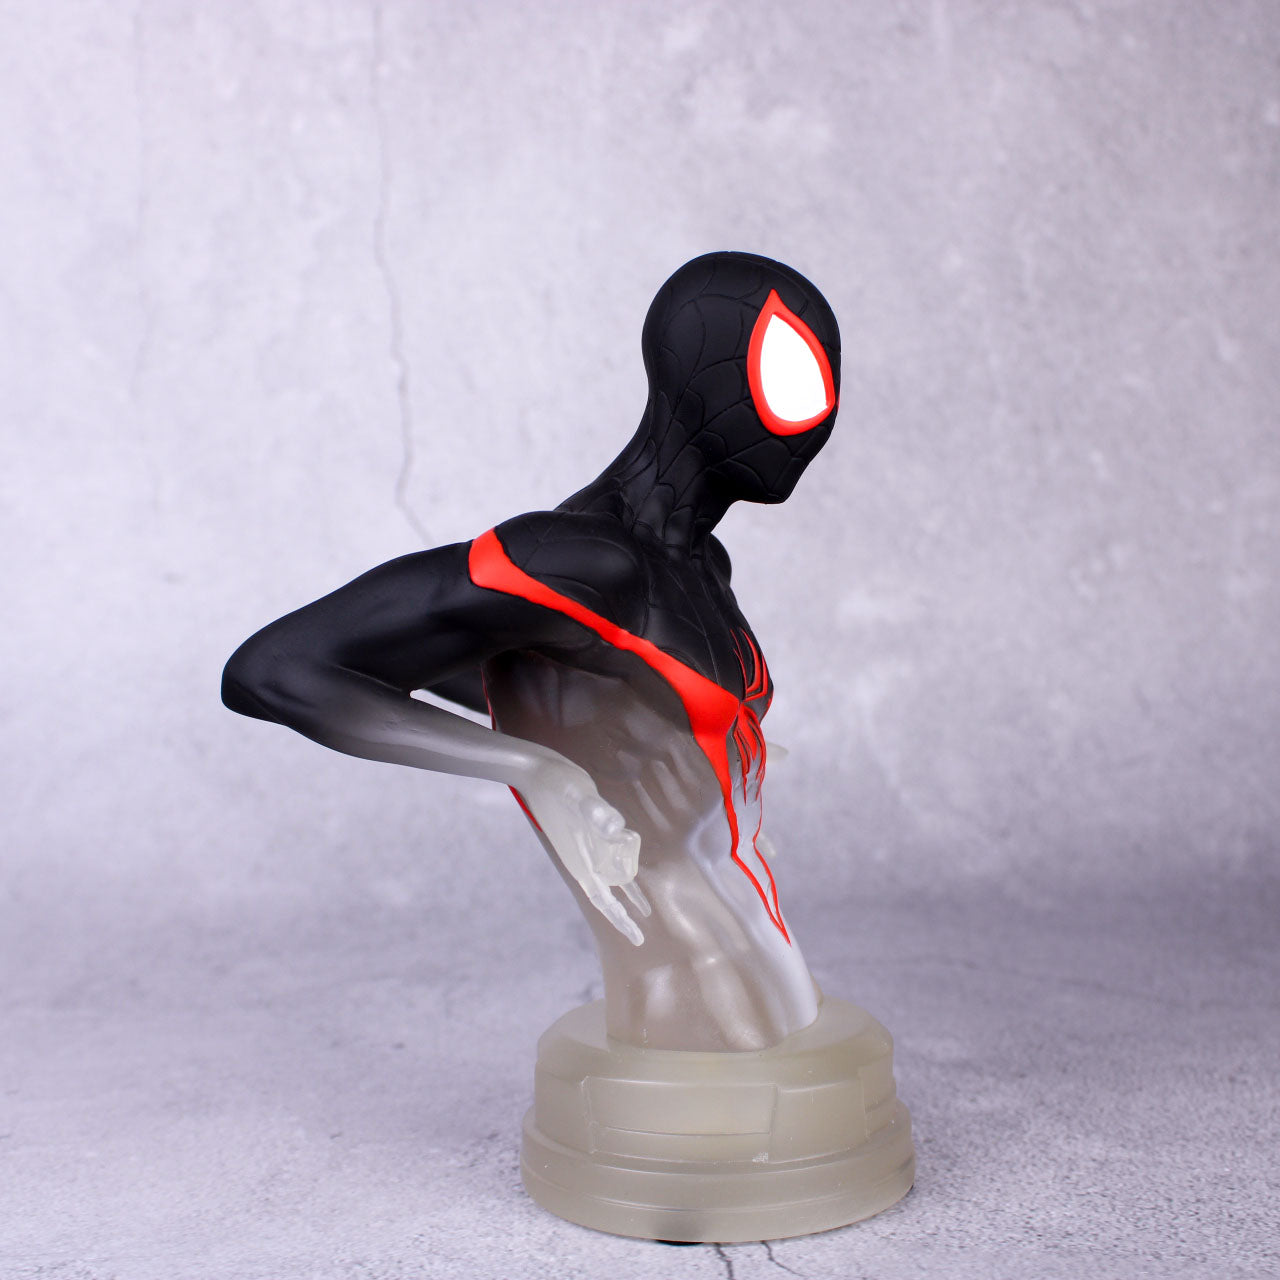 Camouflage Miles Morales (Marvel's Spider-Man) 1/6 Scale Resin Statue Bust